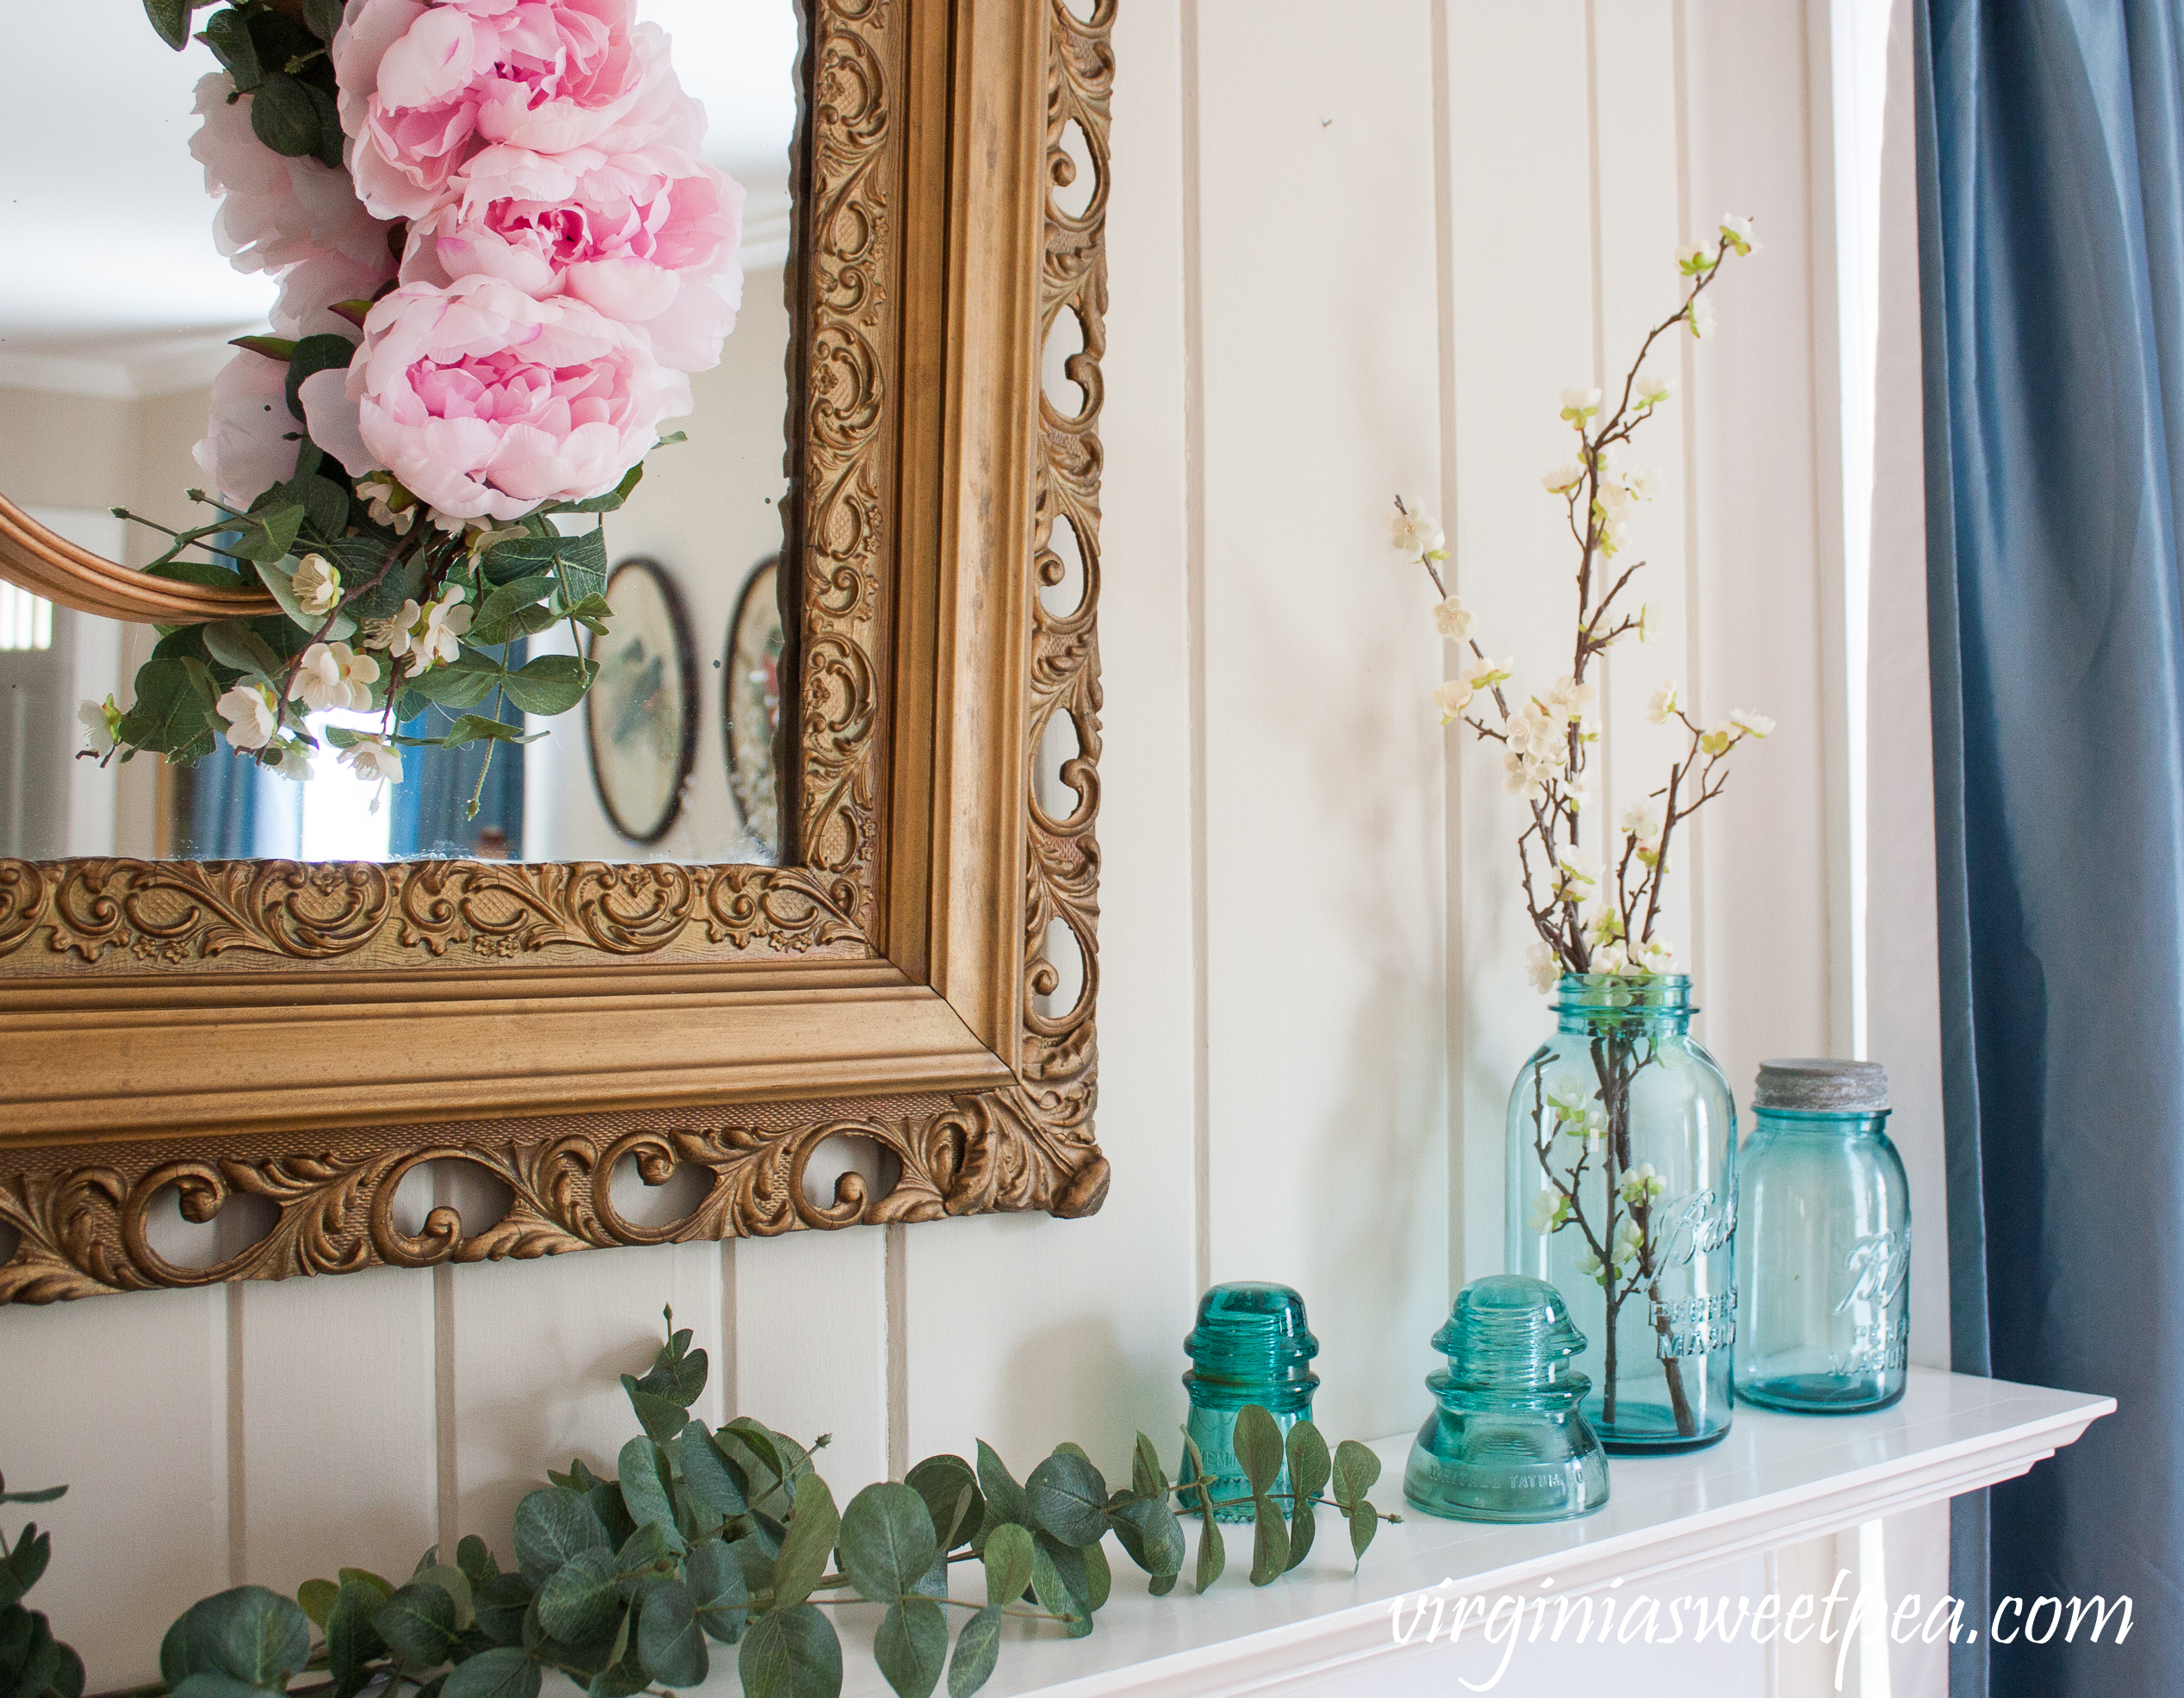 Spring Mantel decorated with vintage blue Ball jars, vintage glass insulators, Eucalyptus, and an antique mirror topped with a Peony hoop wreath